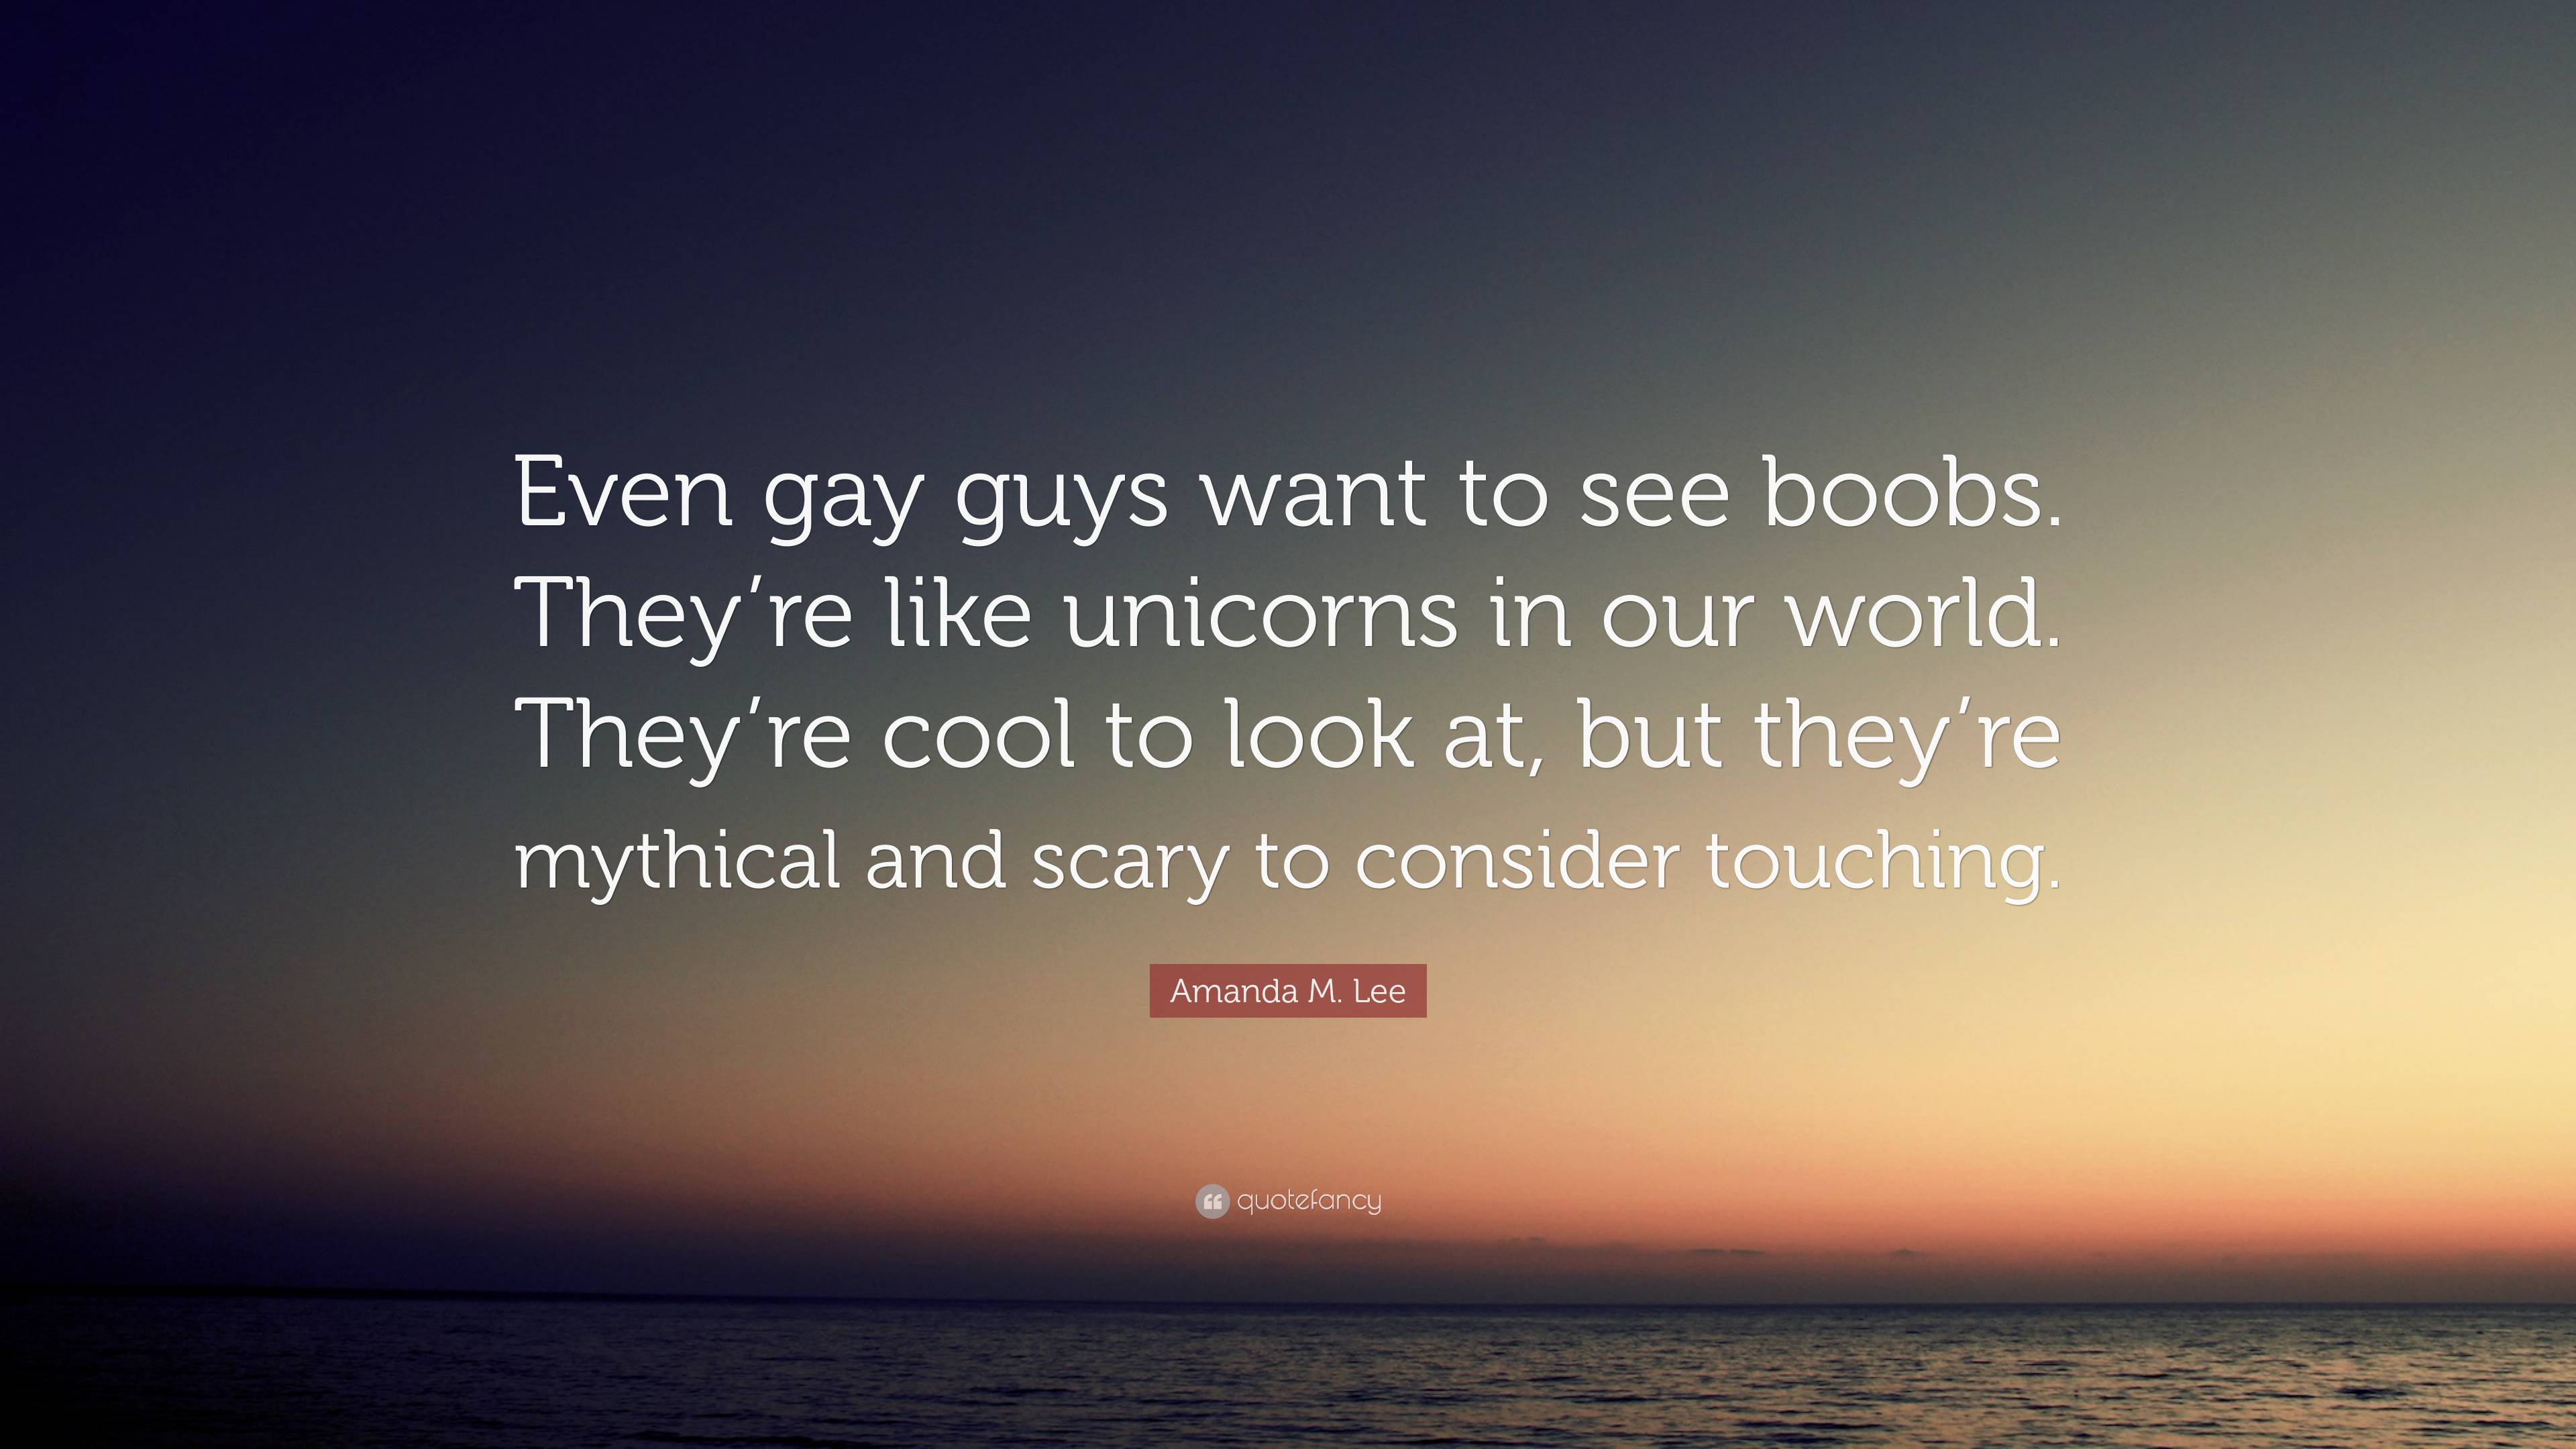 https://quotefancy.com/media/wallpaper/3840x2160/7582360-Amanda-M-Lee-Quote-Even-gay-guys-want-to-see-boobs-They-re-like.jpg